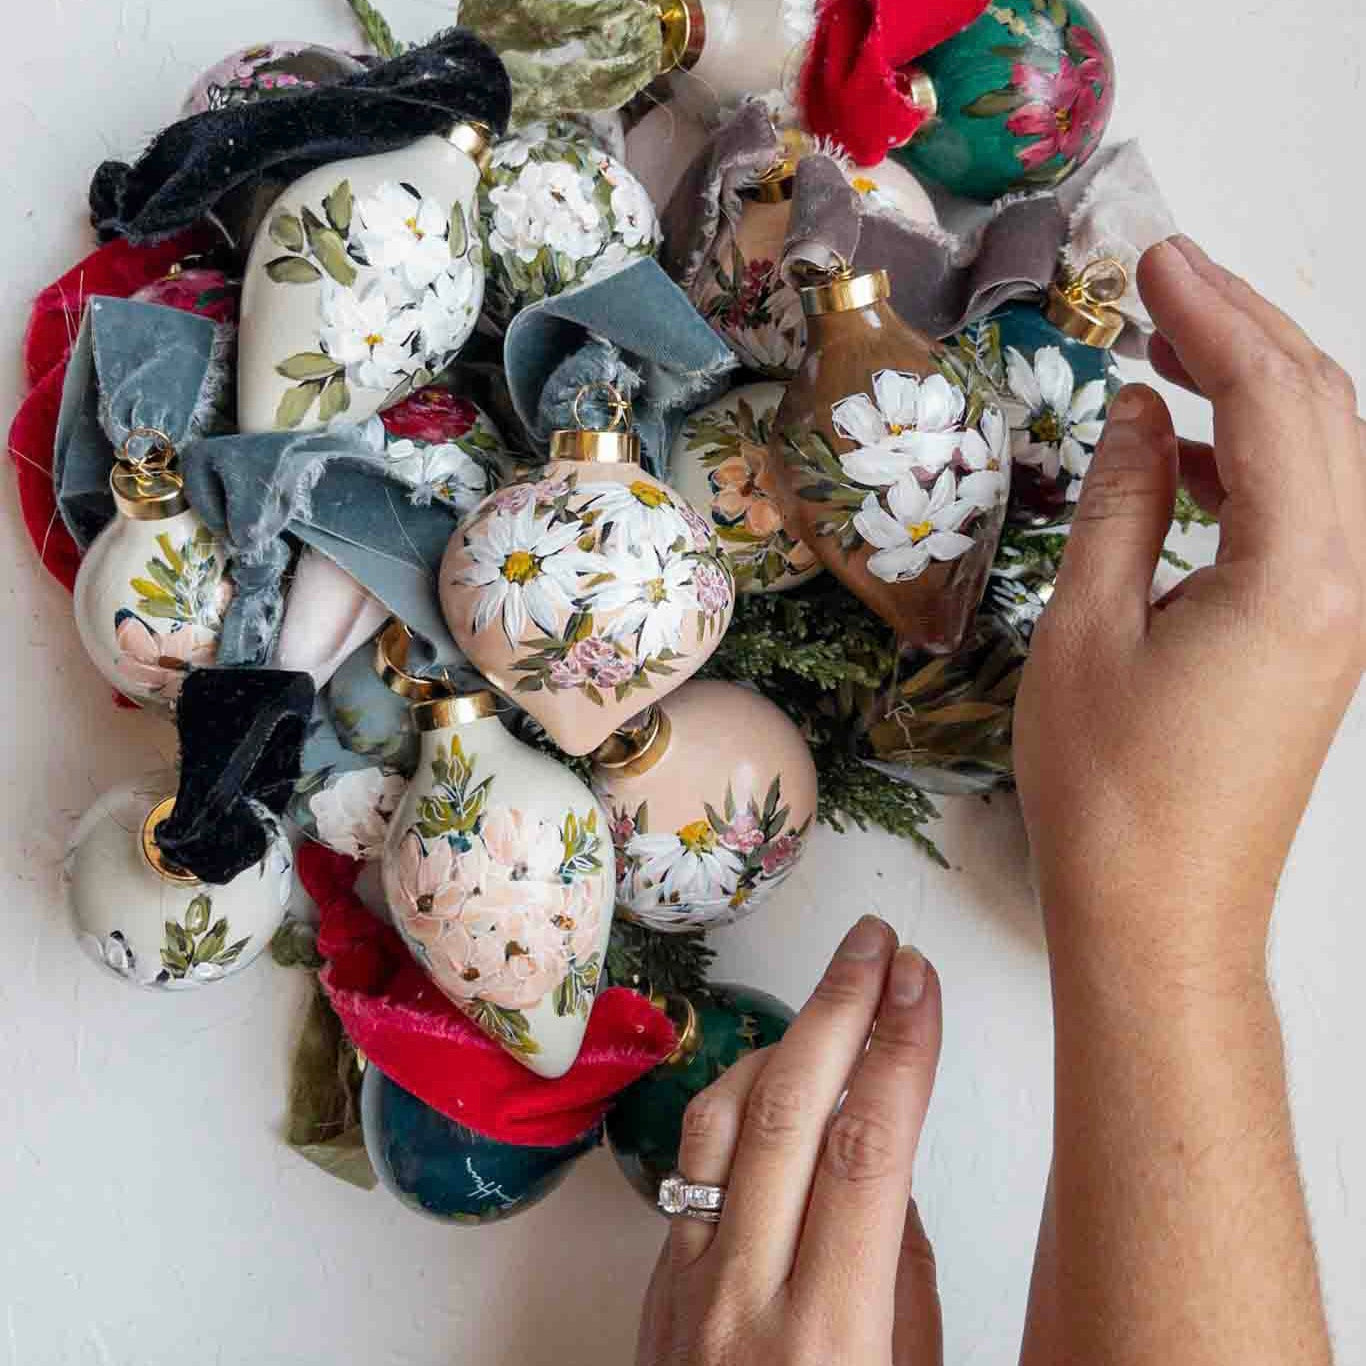 Heirloom Ornament - Floral 19